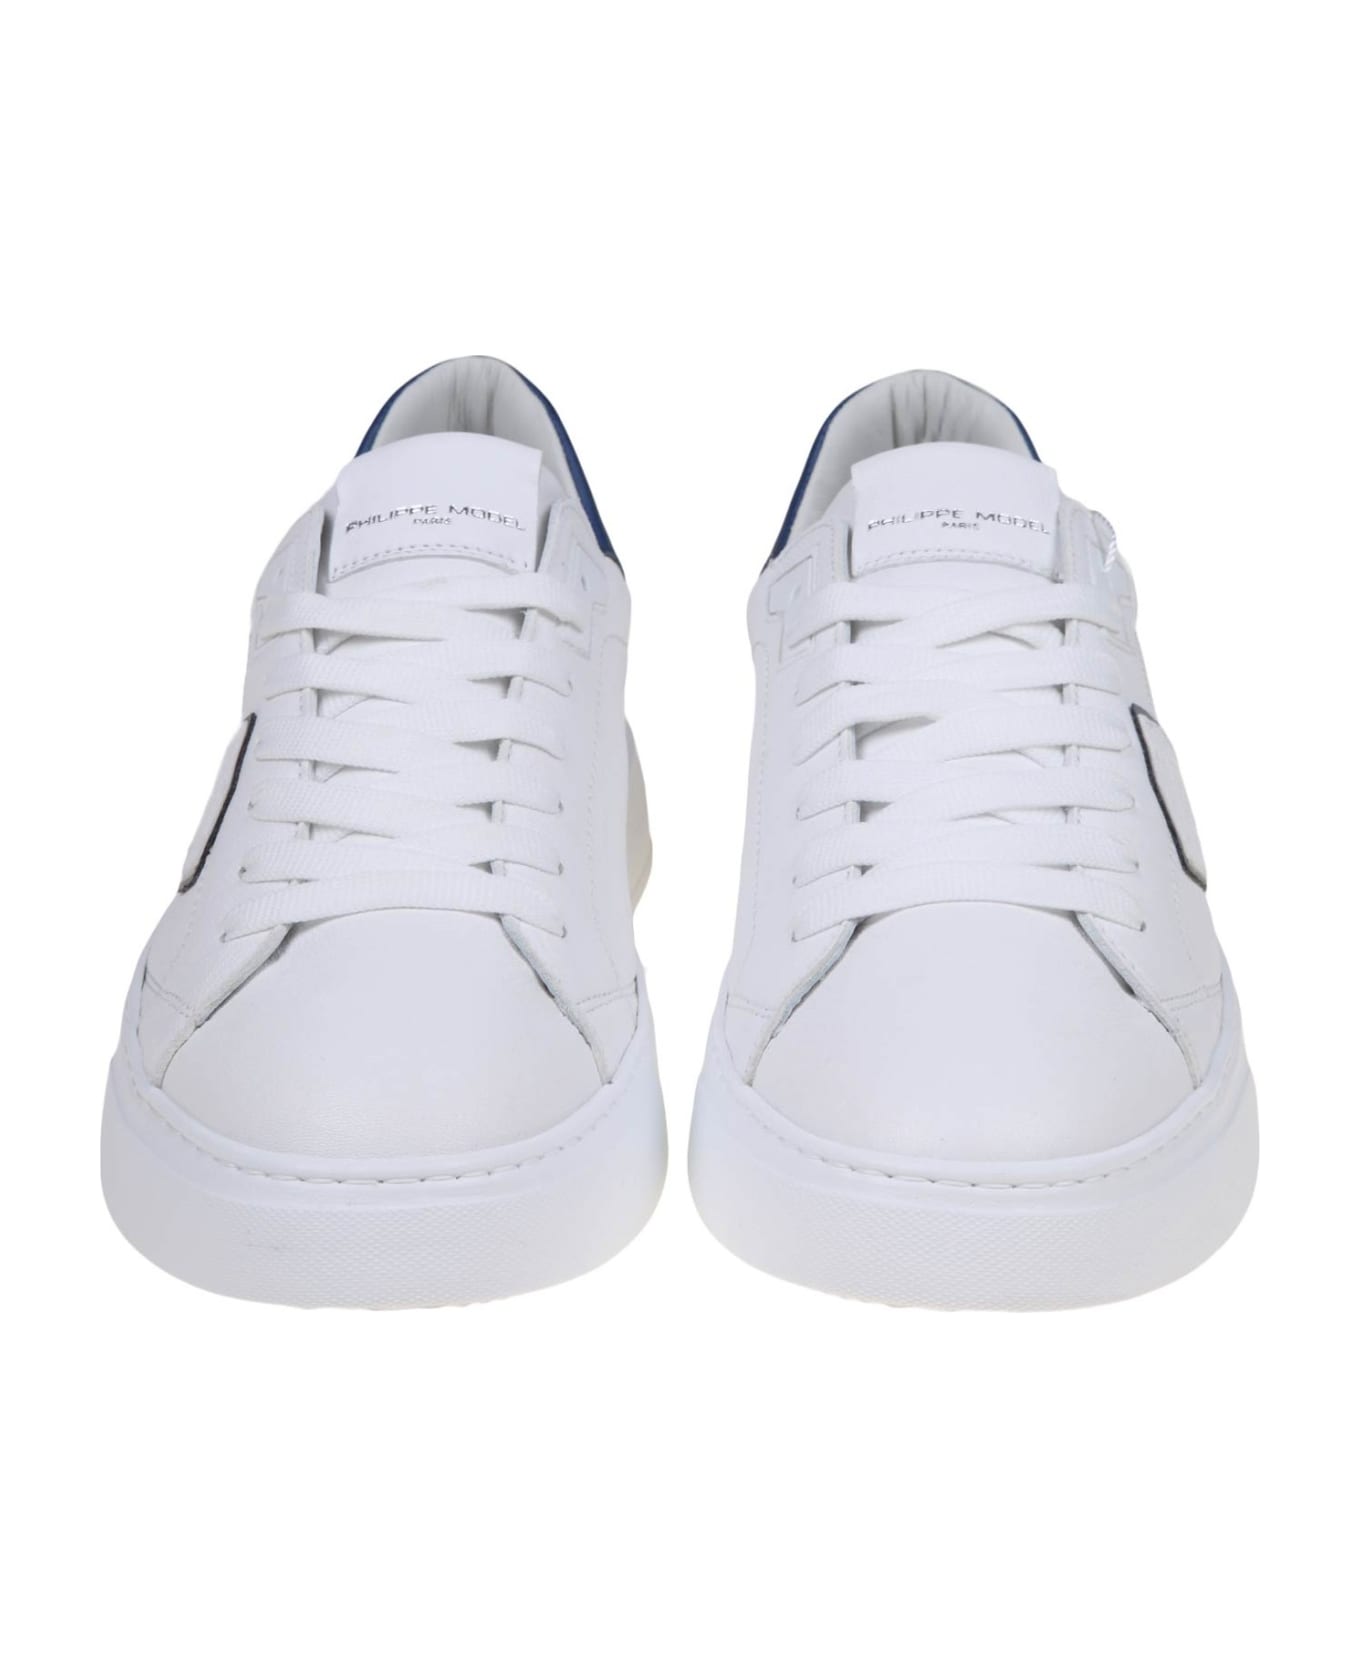 Philippe Model Temple Sneakers In White/blue Leather Philippe Model - WHITE スニーカー